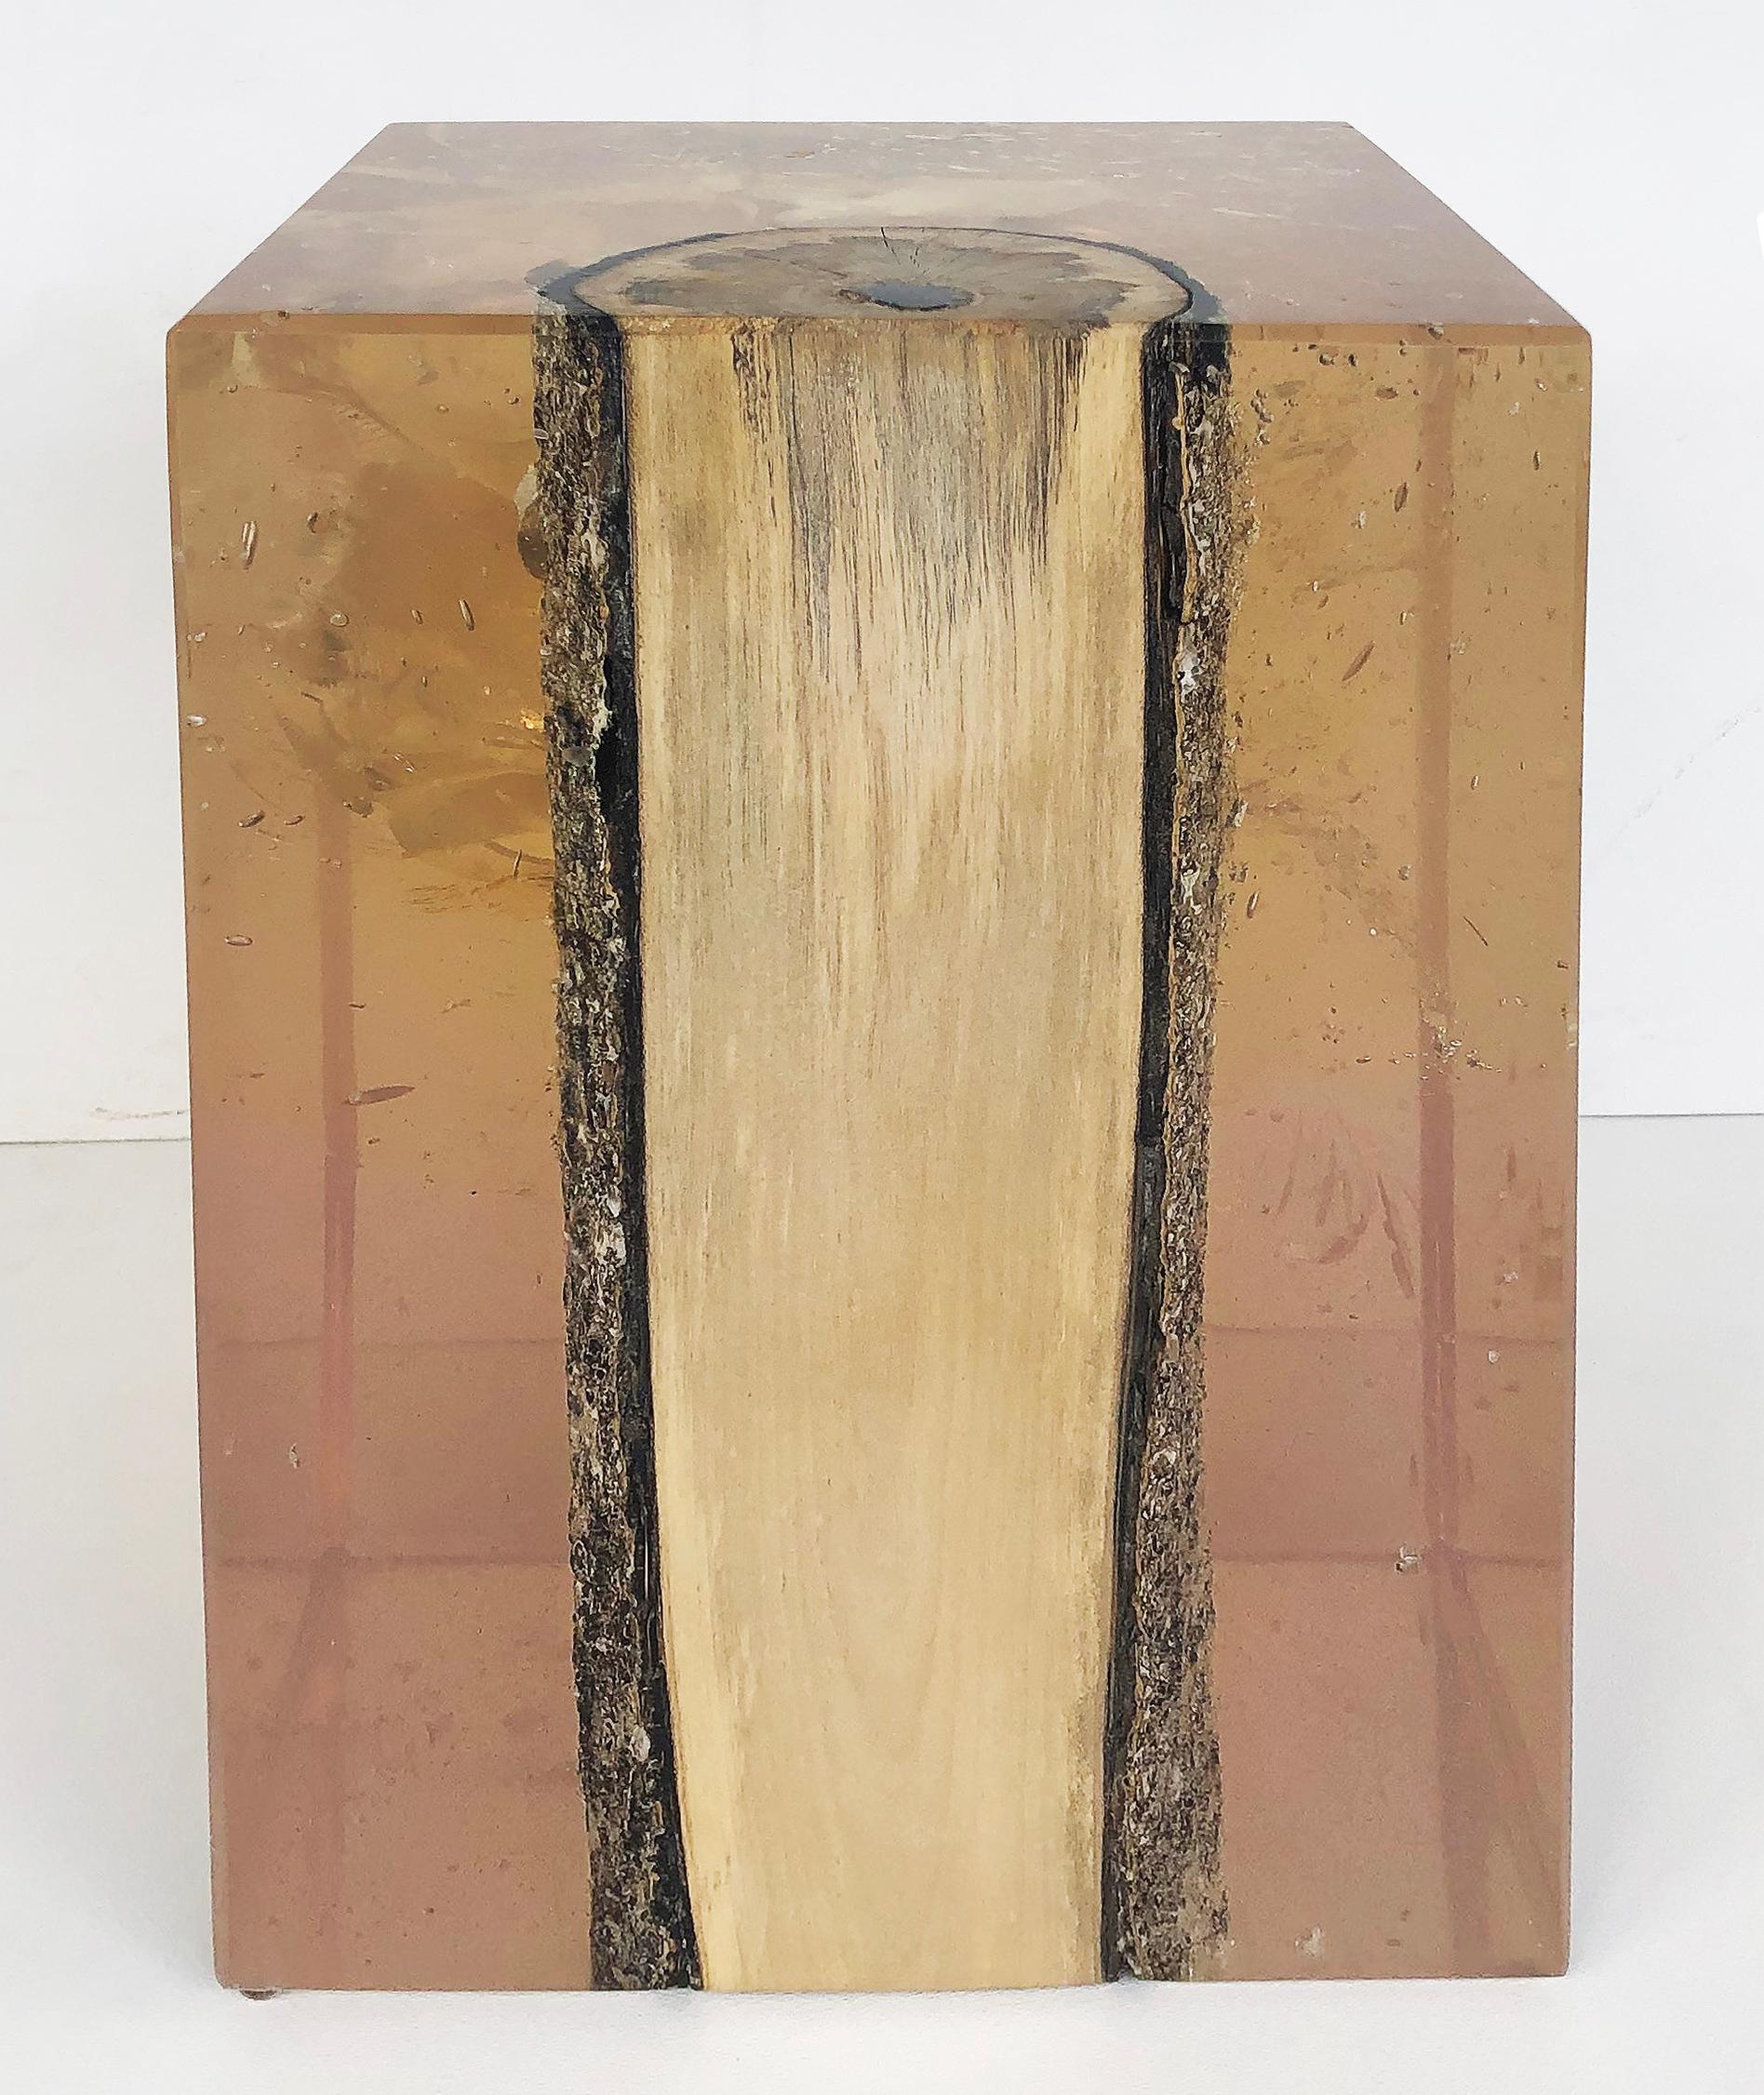 Organic Modern Lucite Encased Wood Trunk/Pedestal/Occasional Table